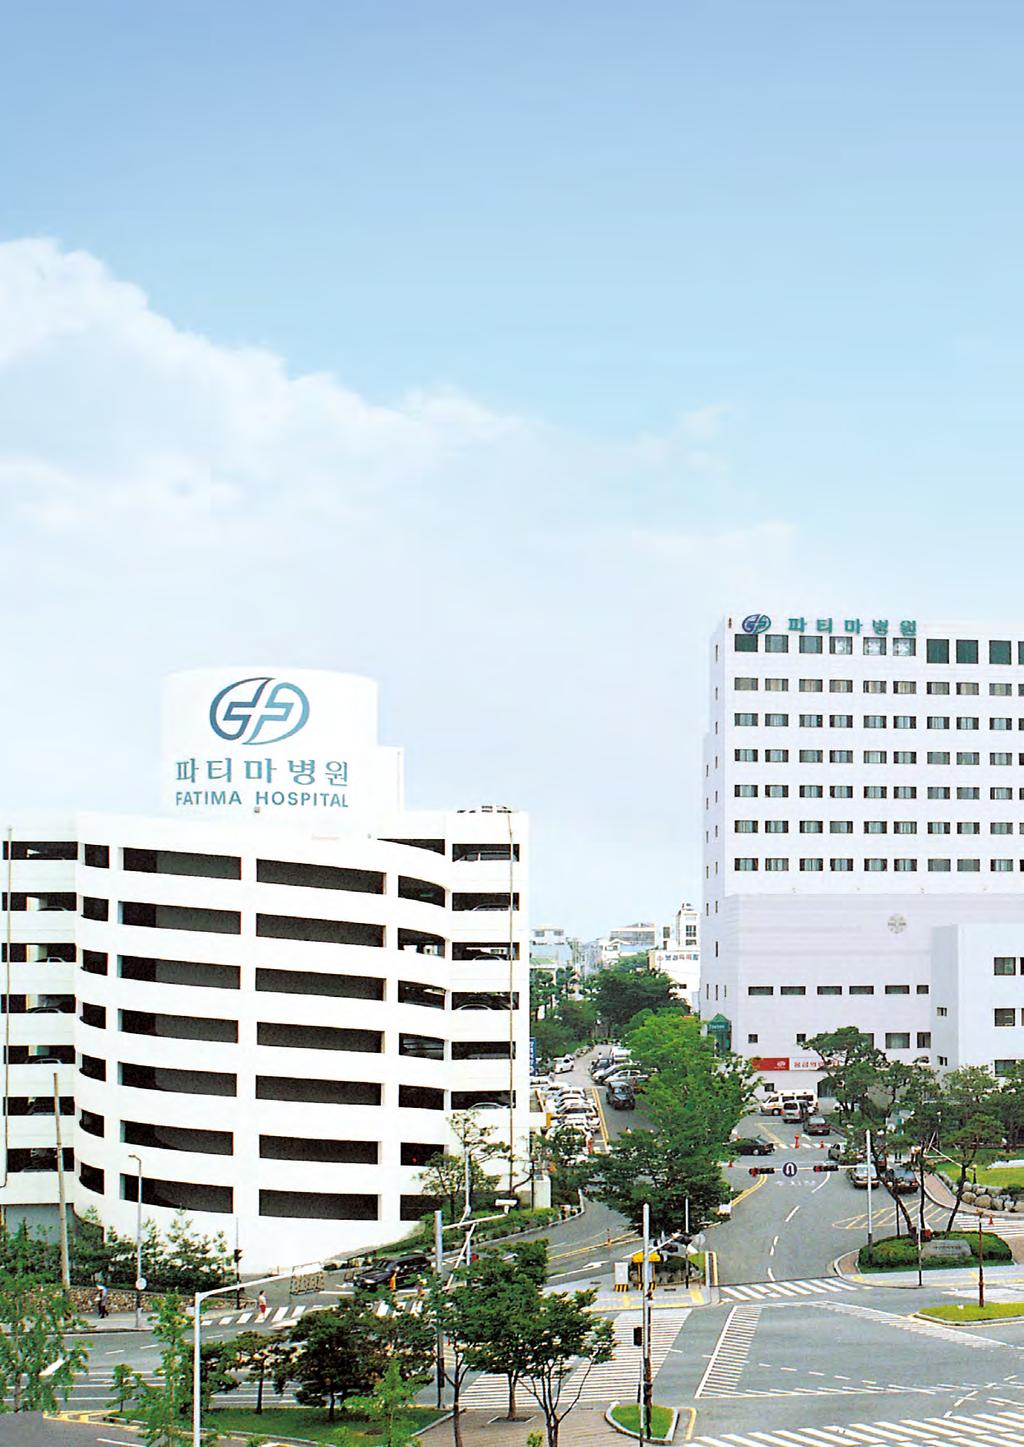 Find Health and Light of the Happy Life at Daegu Fatima Hospital The light of health, Daegu Fatima hospital!